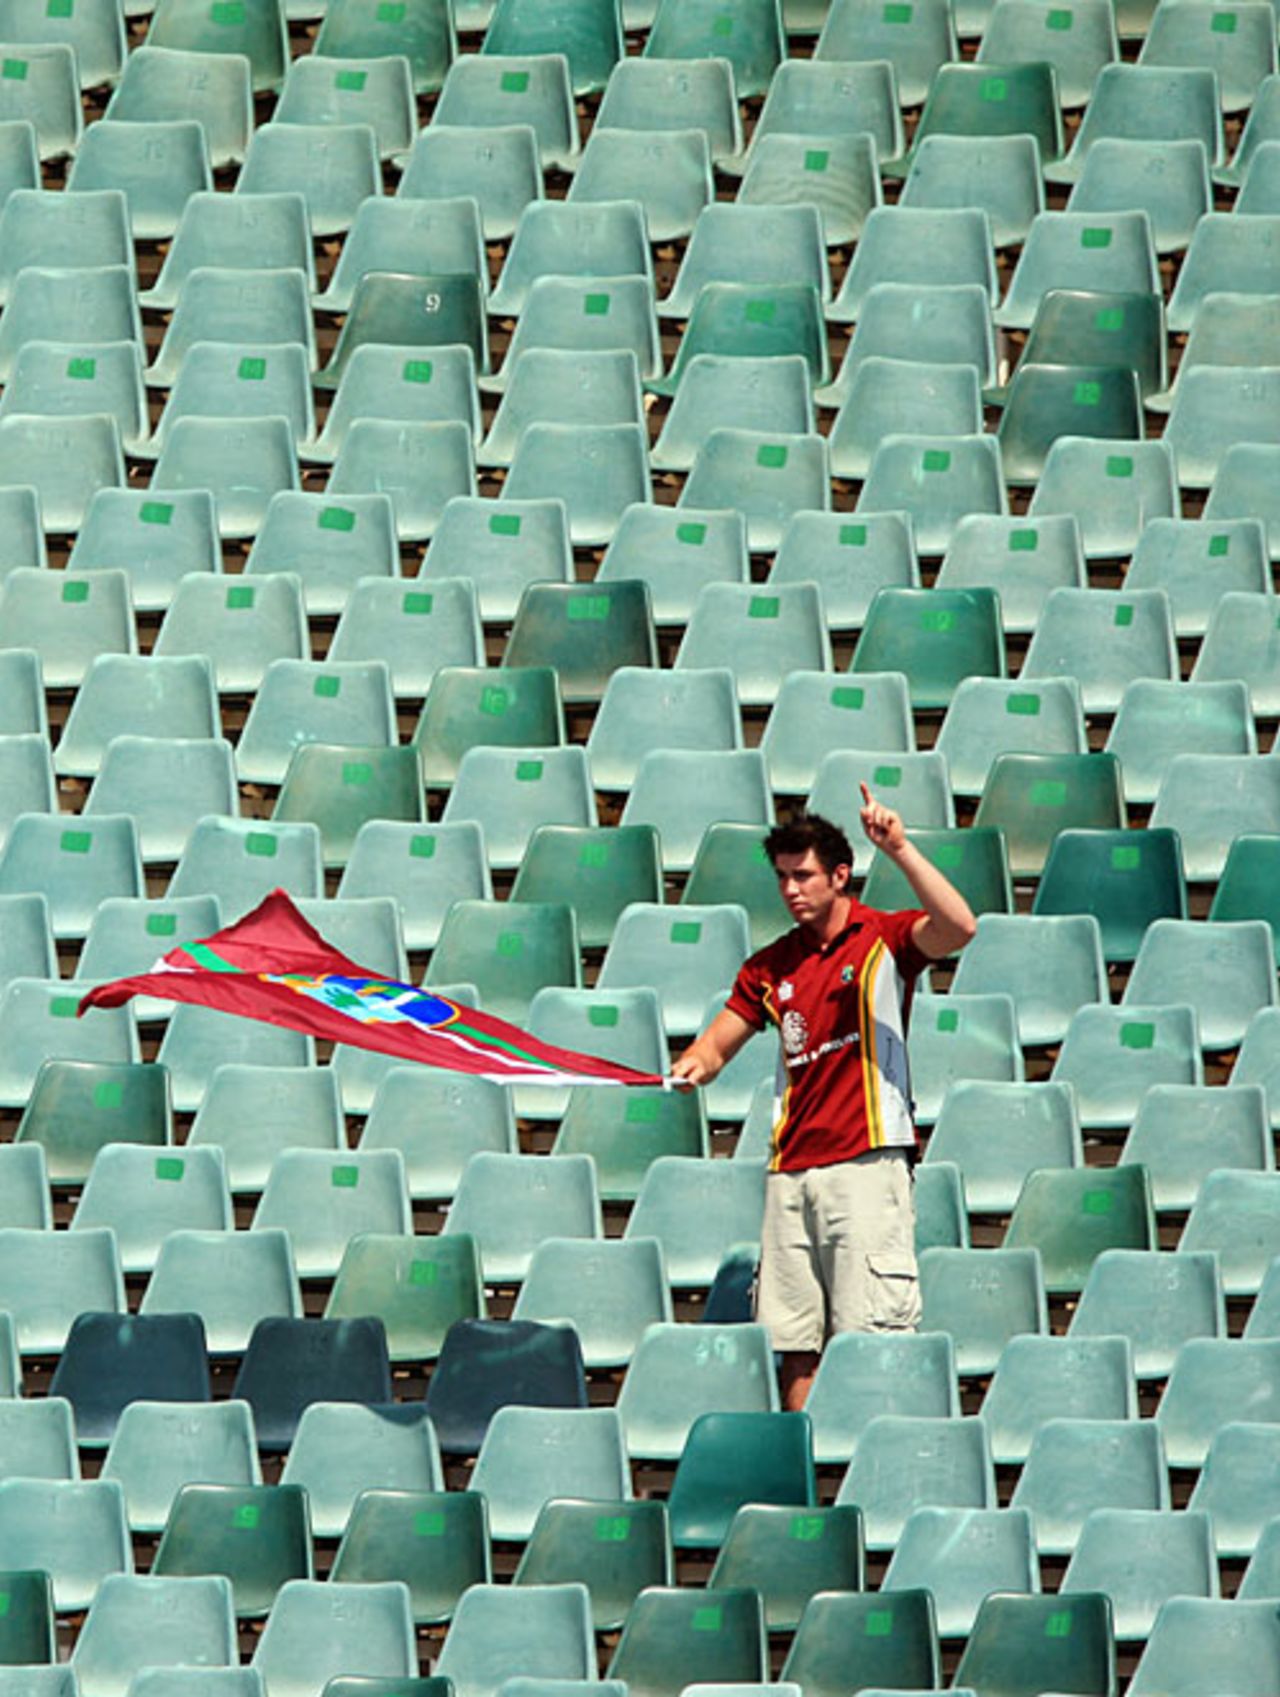 A West Indian fan watches his team get eliminated, Bangladesh v West Indies, Group A, ICC World Twenty20, Johannesburg, September 13, 2007